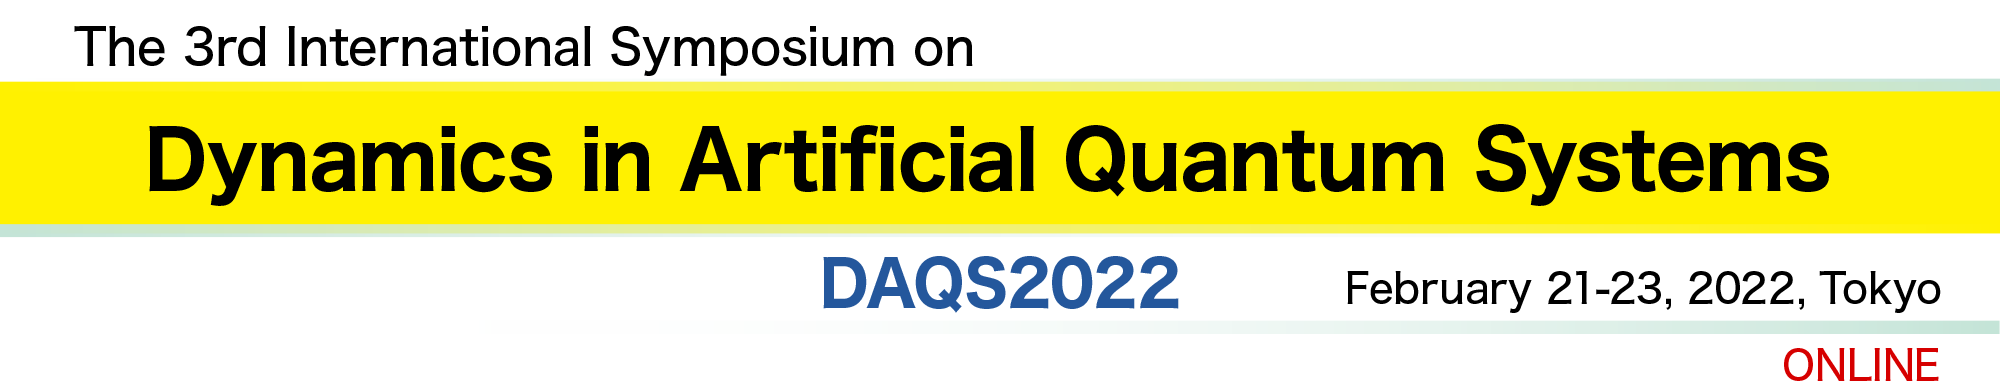 The 3rd International Symposium on Dynamics in Artificial Quantum Systems (DAQS2022)